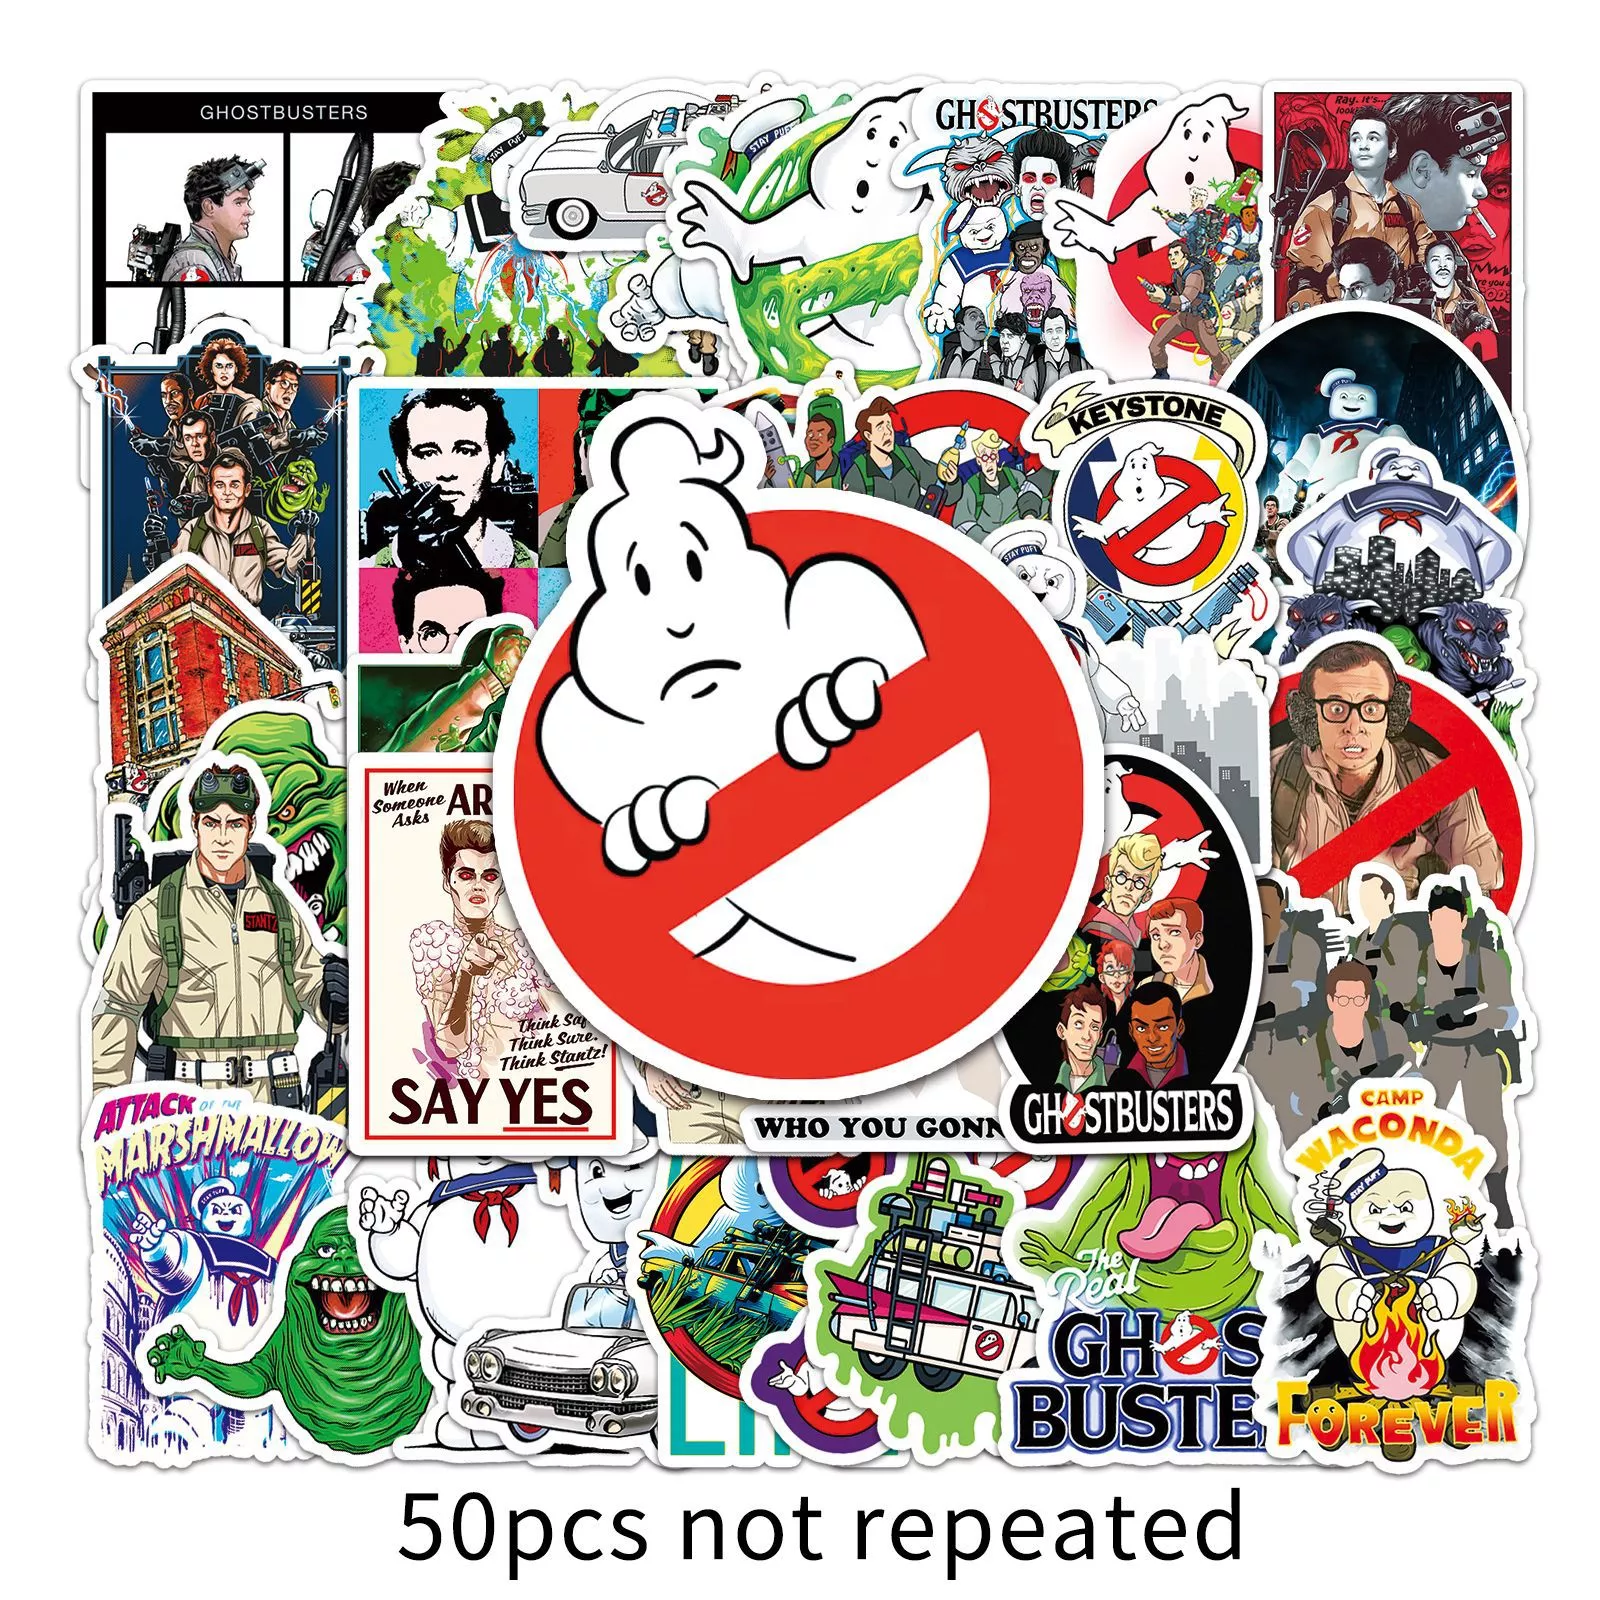 10/30/50pcs  Ghostbuster U.s. Drama Stickers Scooter Luggage Compartment Scrapbook Notebook Computer Diycar Motorcycle Stickers 10 30 50pcs new children s cartoon cute lazy egg graffiti stickers notebook scooter trolley case decorative stickers wholesale